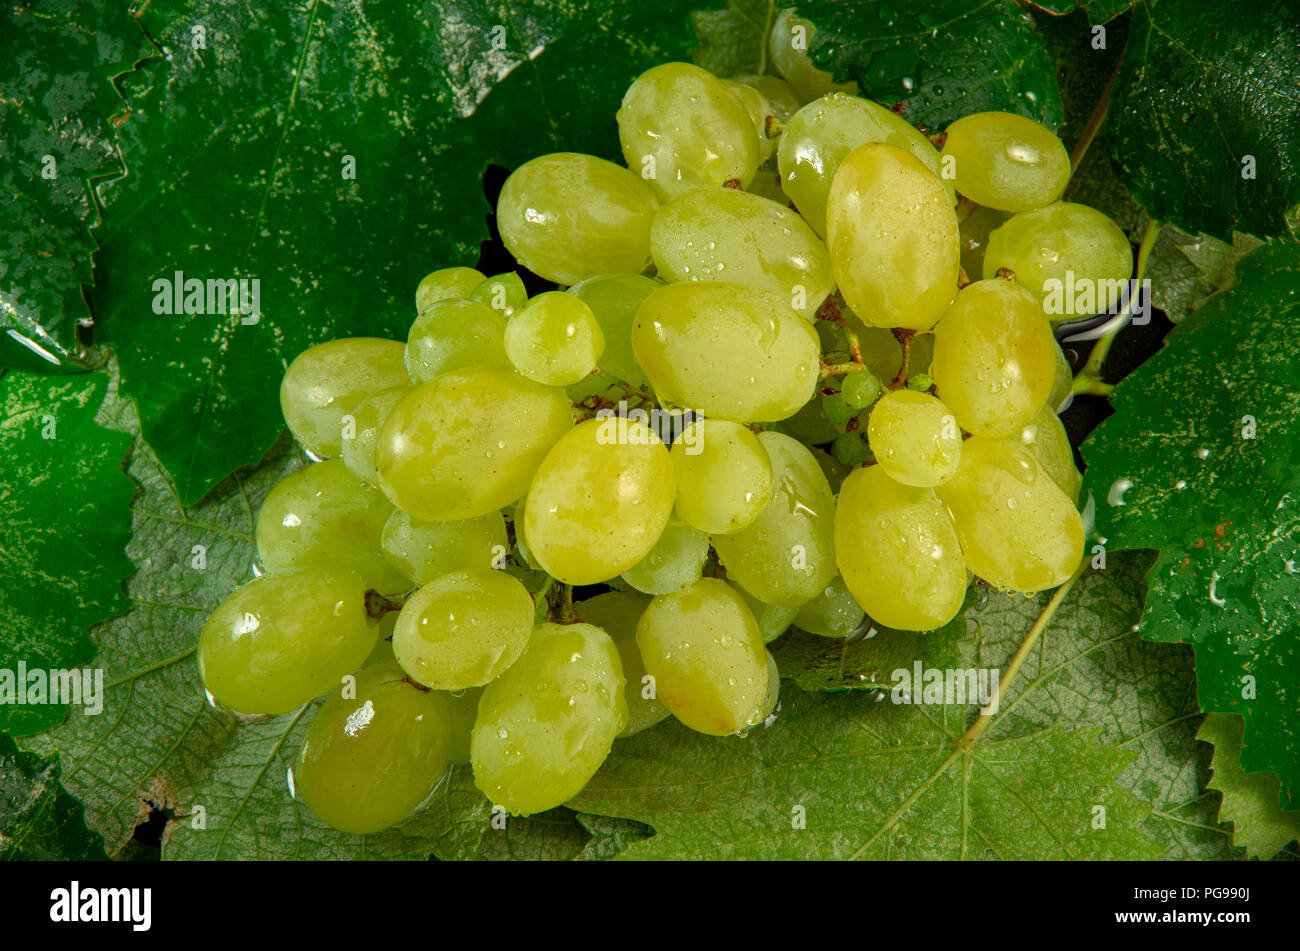 Top view of a wet bunch of grapes with drops of water on grape leaves Stock Photo